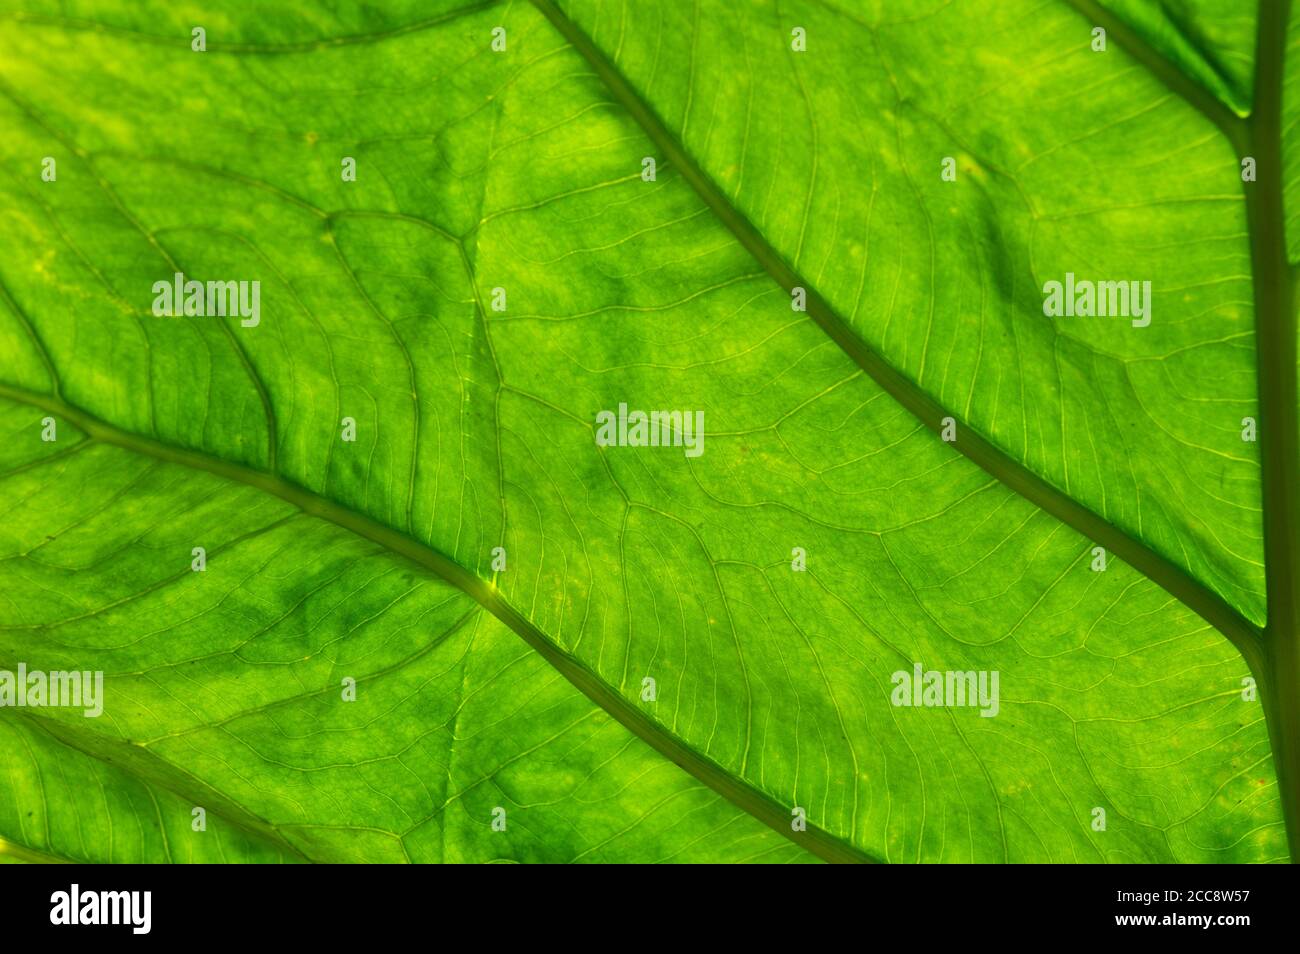 A leaf is the principal lateral appendage of the vascular plant stem, usually borne above ground and specialised for photosynthesis. Stock Photo